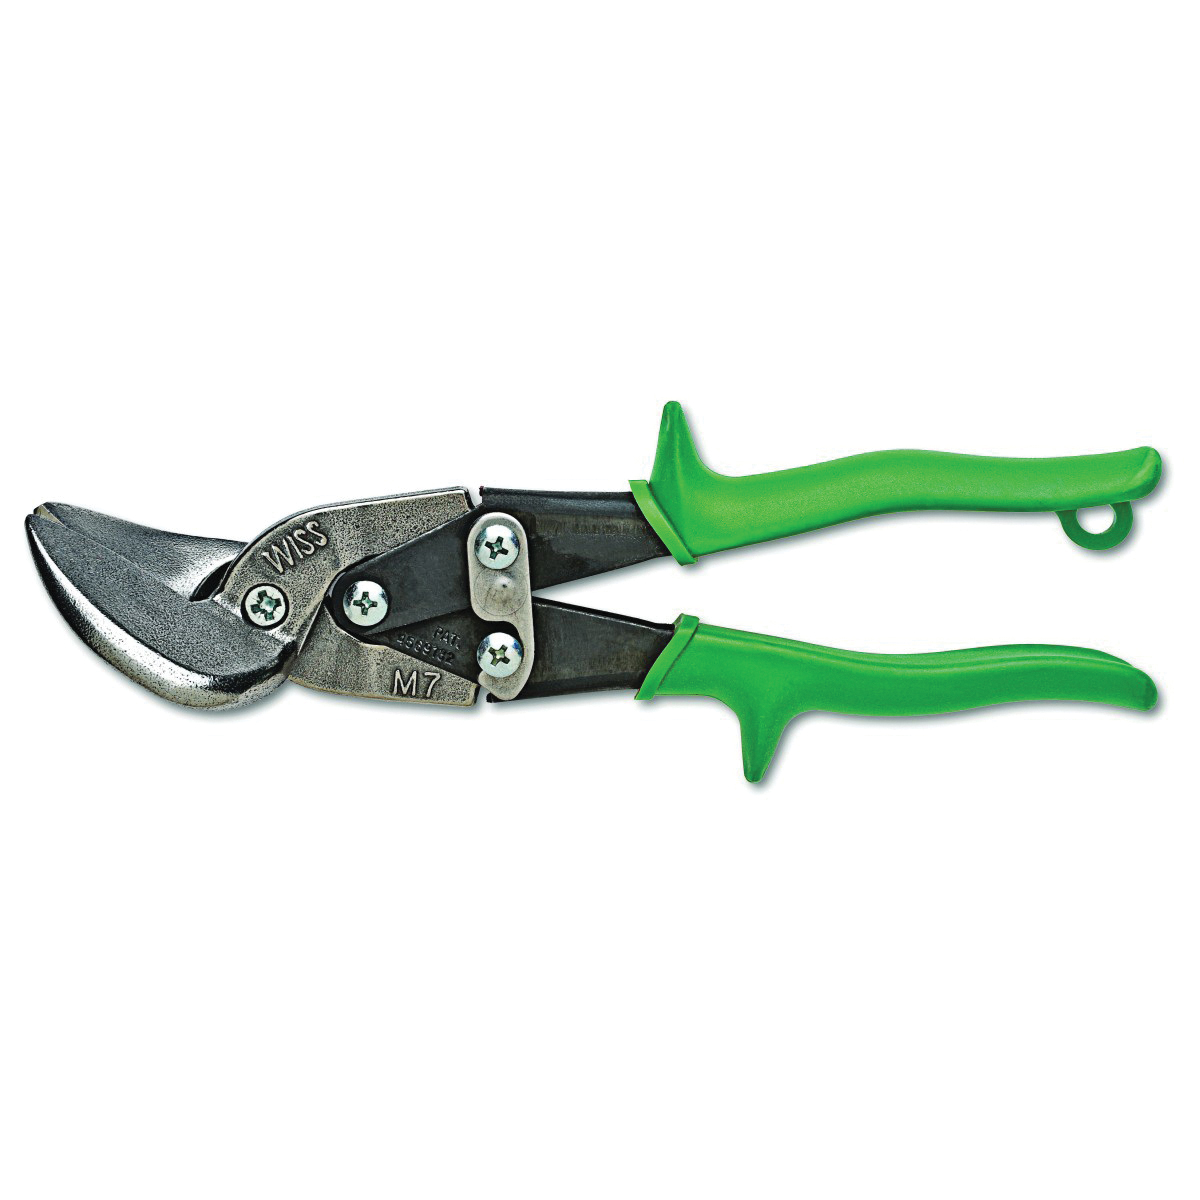 CRESCENT Wiss® MetalMaster® M7R Aviation Snips, 9-1/4 in OAL, 1-1/4 in L Cut, Left, Right, Straight Cut, Green Handle